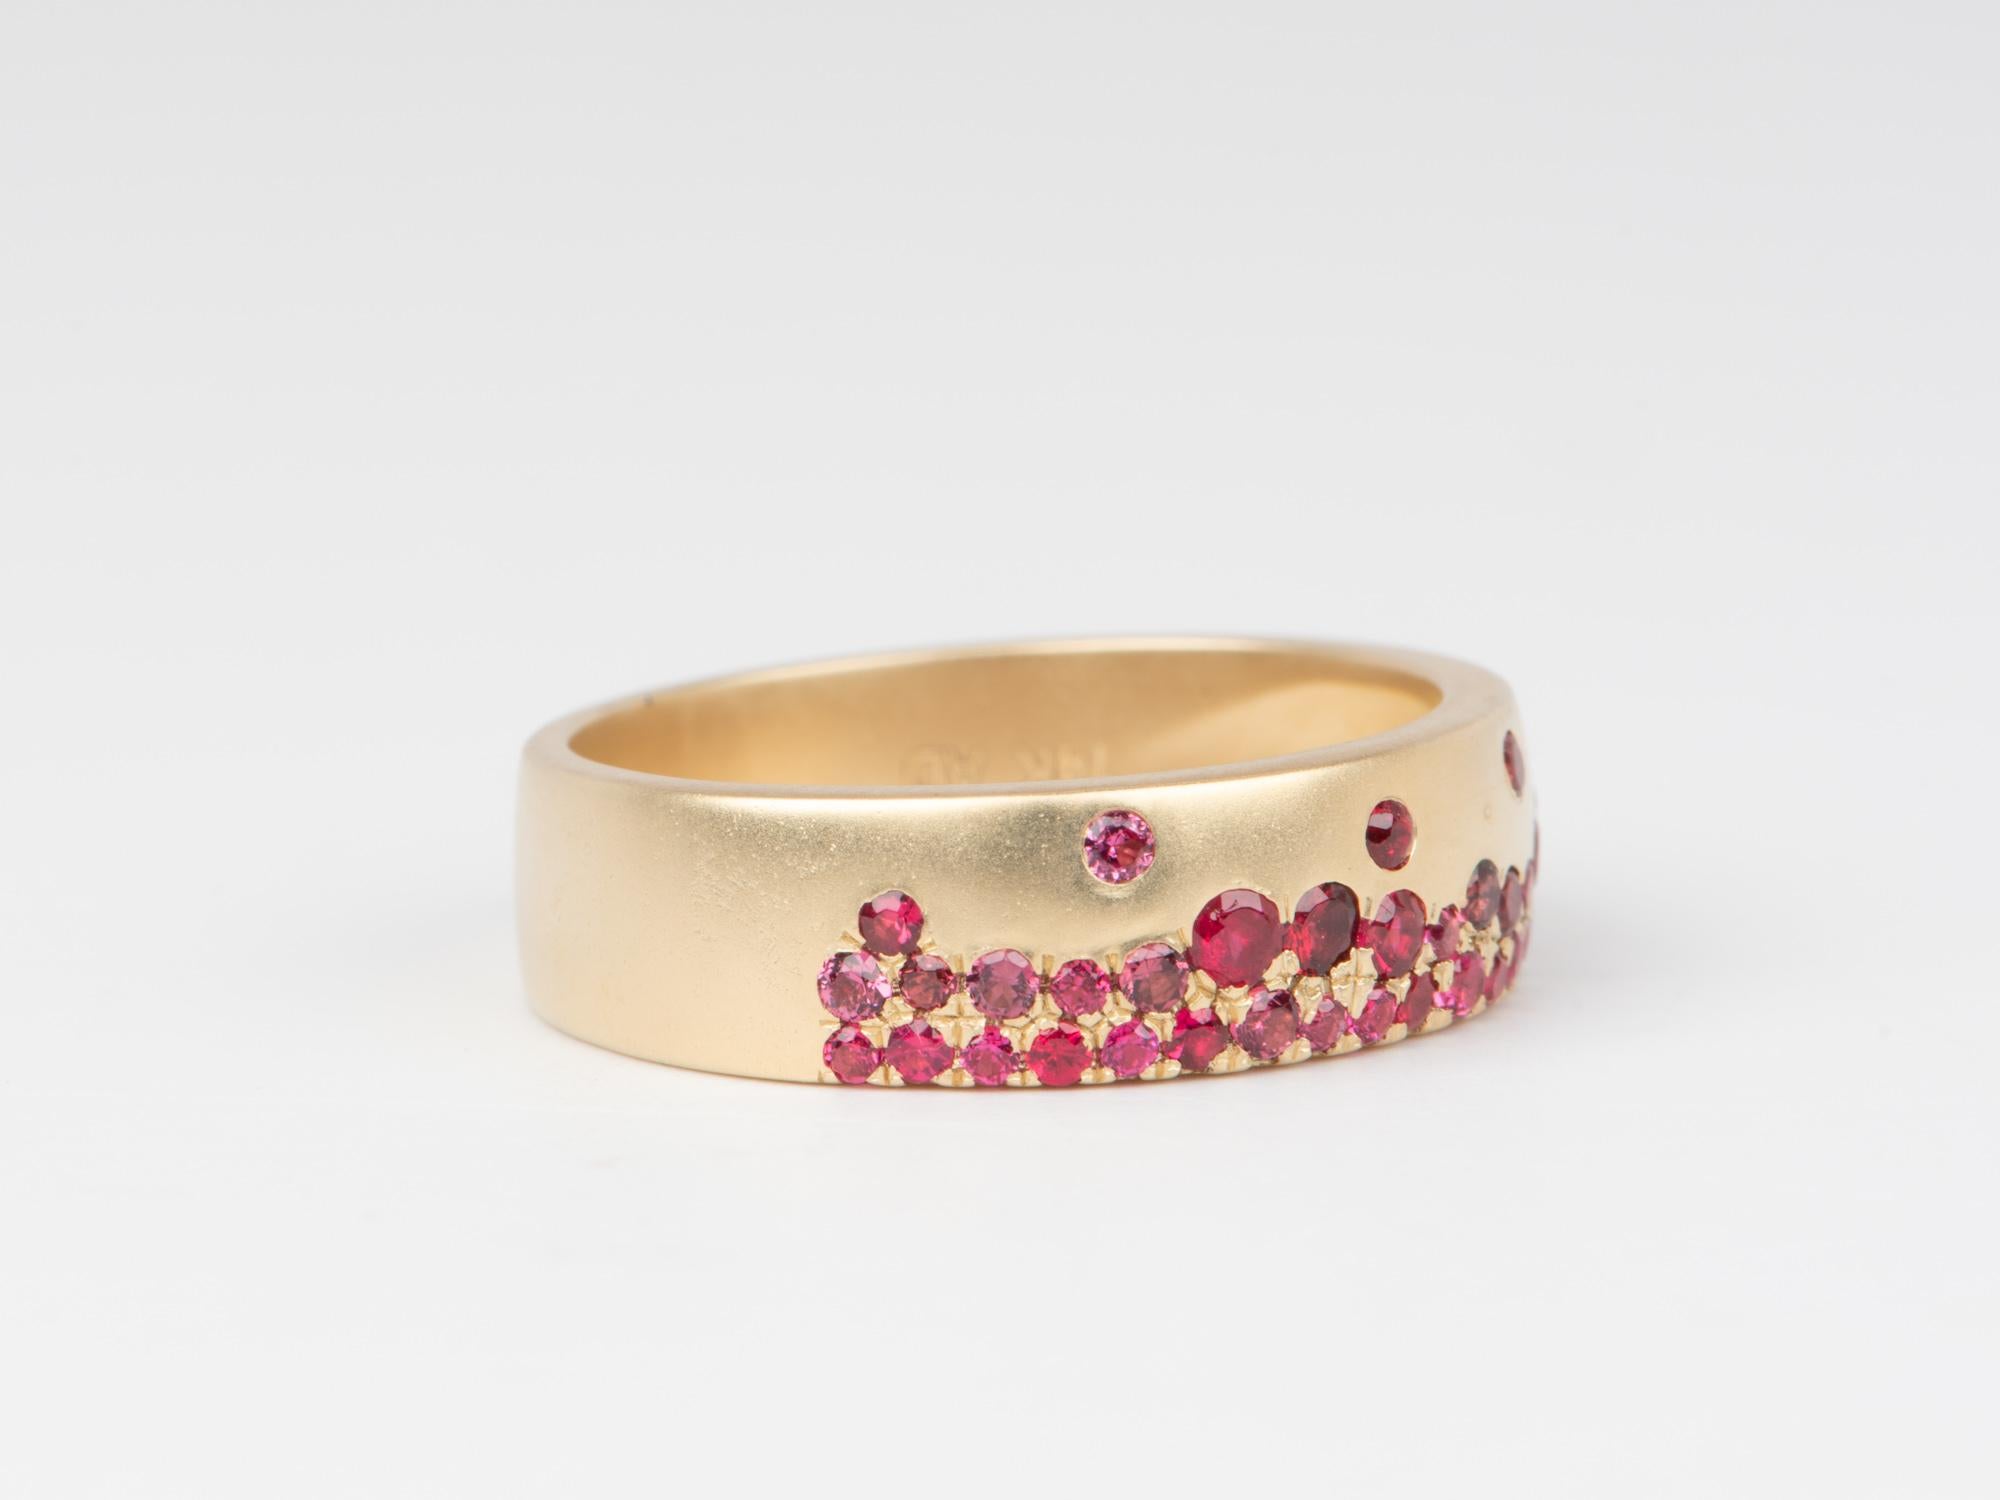 ♥ 6mm Wide Bright Red Spinel Sprinkle Wedding Band 14K Gold
♥ The design measures 6.1mm in length (North South direction), 20.5mm in width (East West direction), and sits 2mm tall from the finger. Band width is 5.4mm.

♥  Ring size: US 7.5 (Free